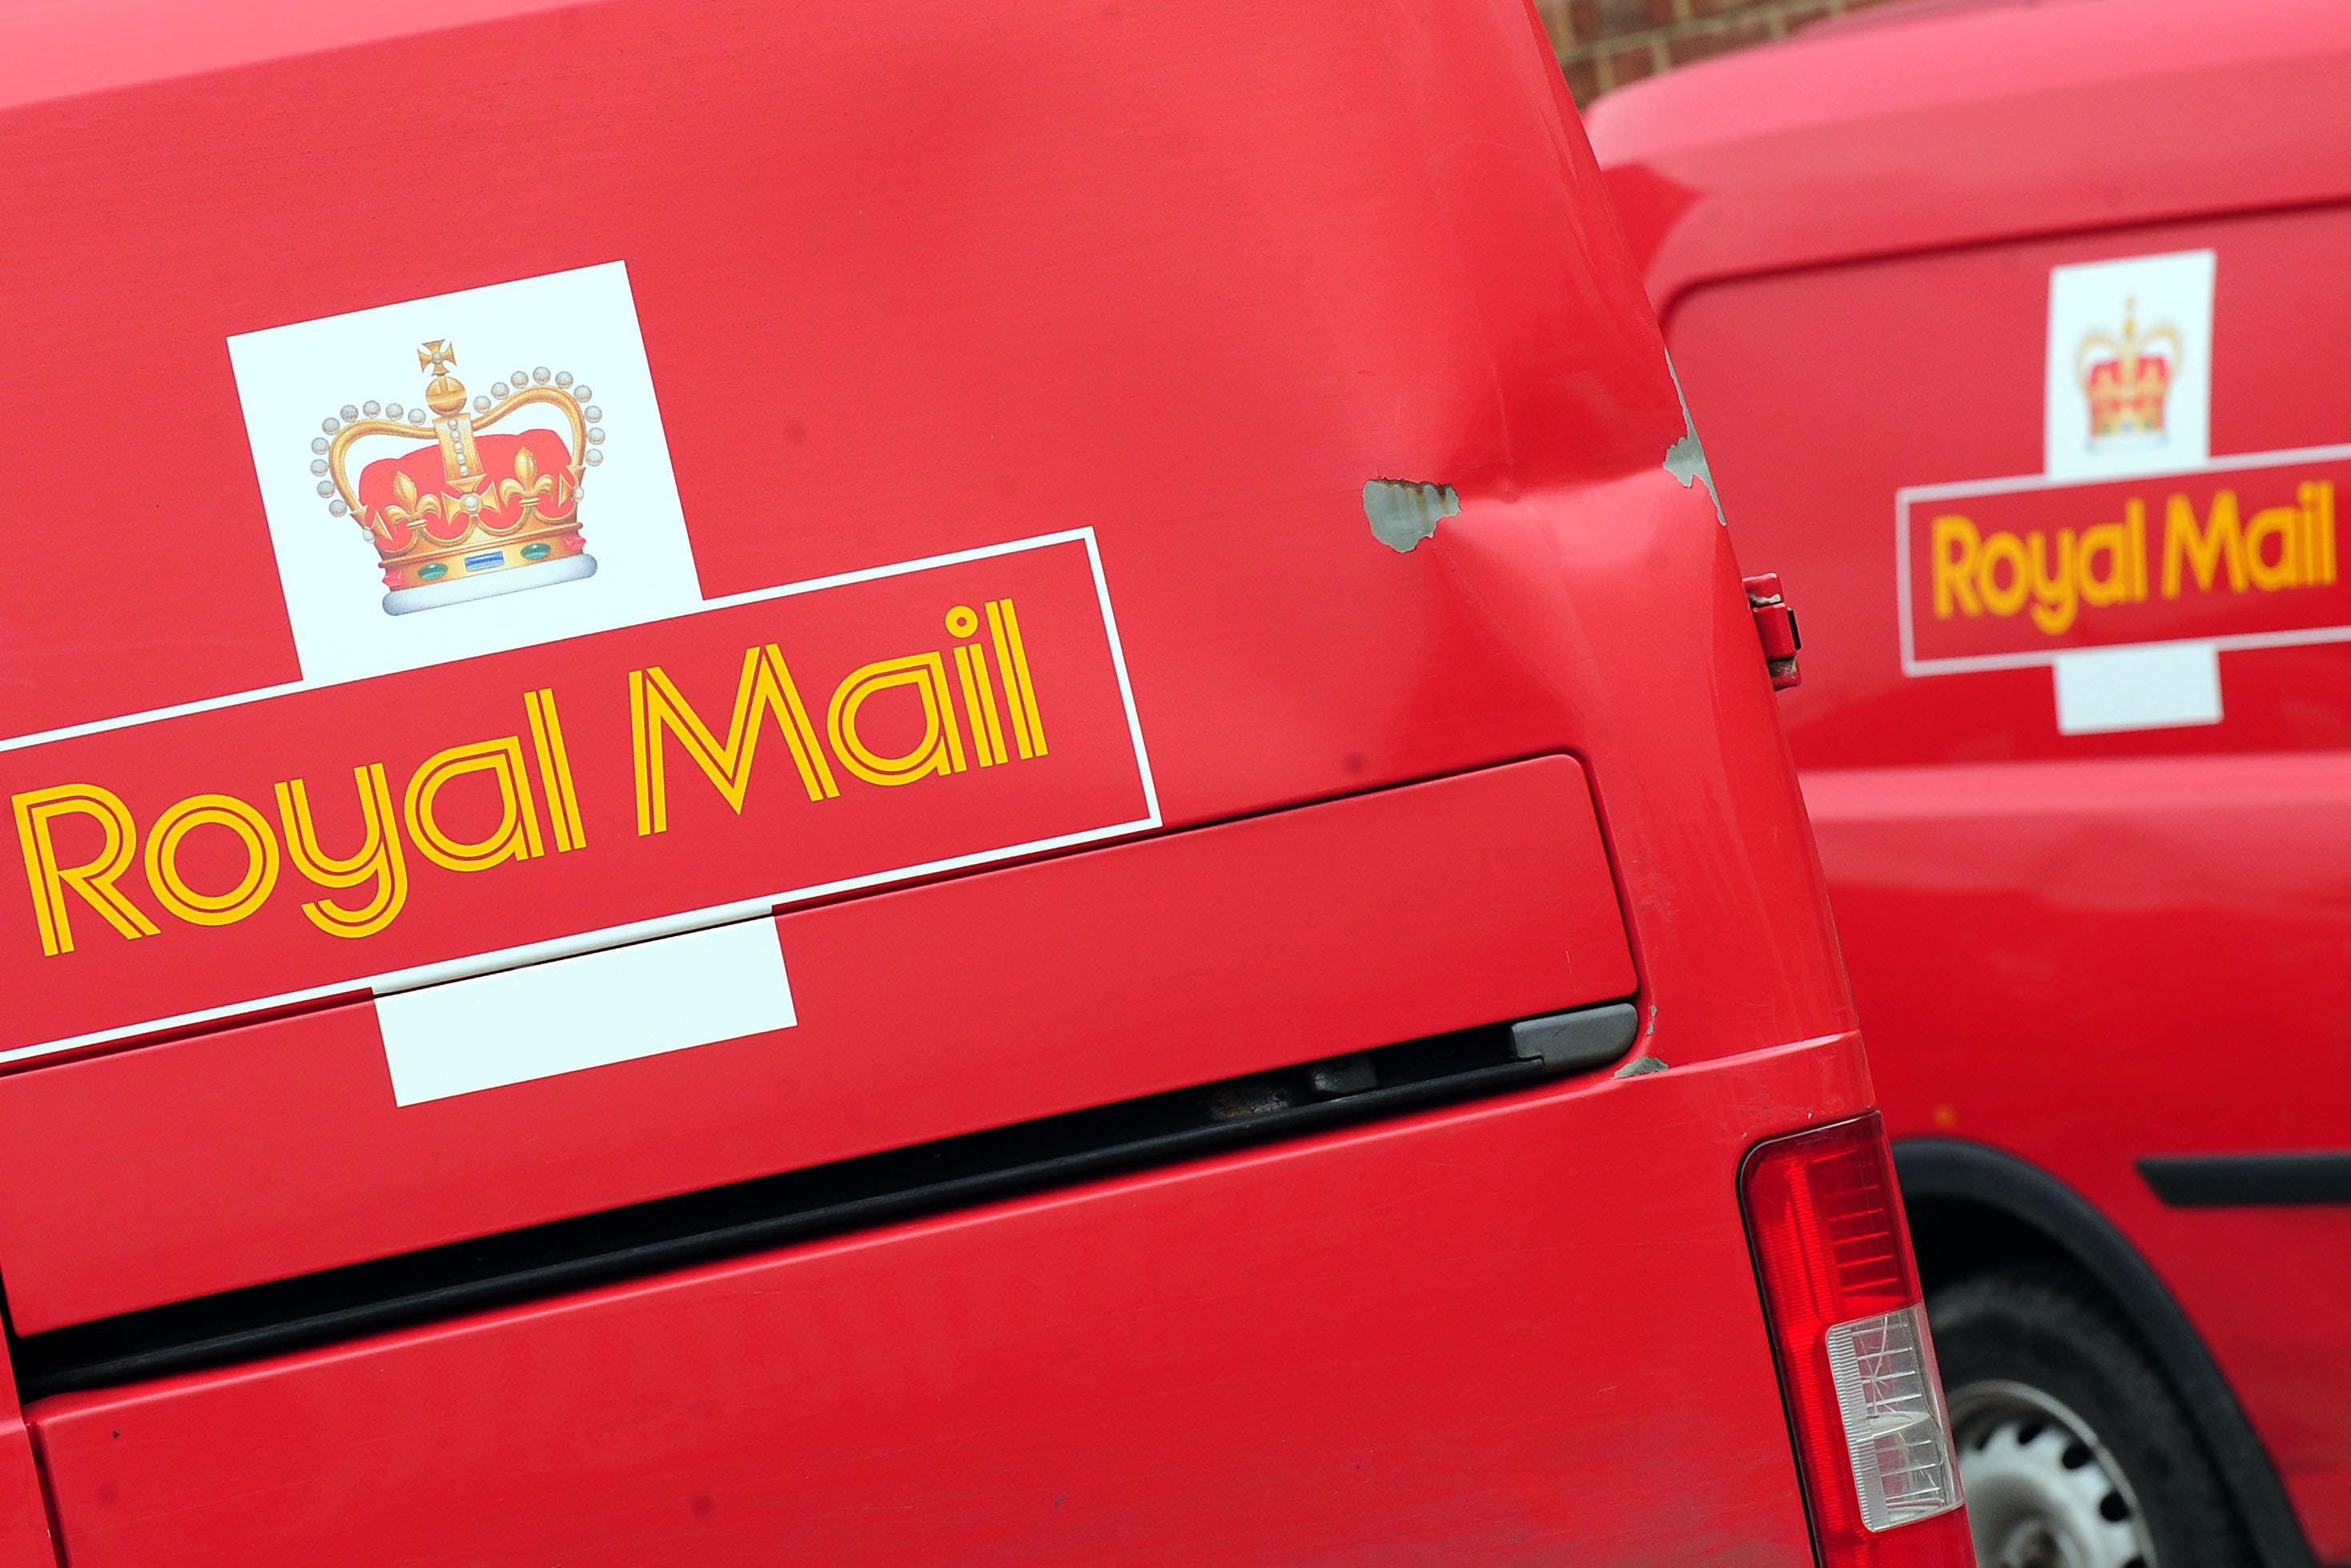 A Czech billionaire wants to buy the Royal Mail